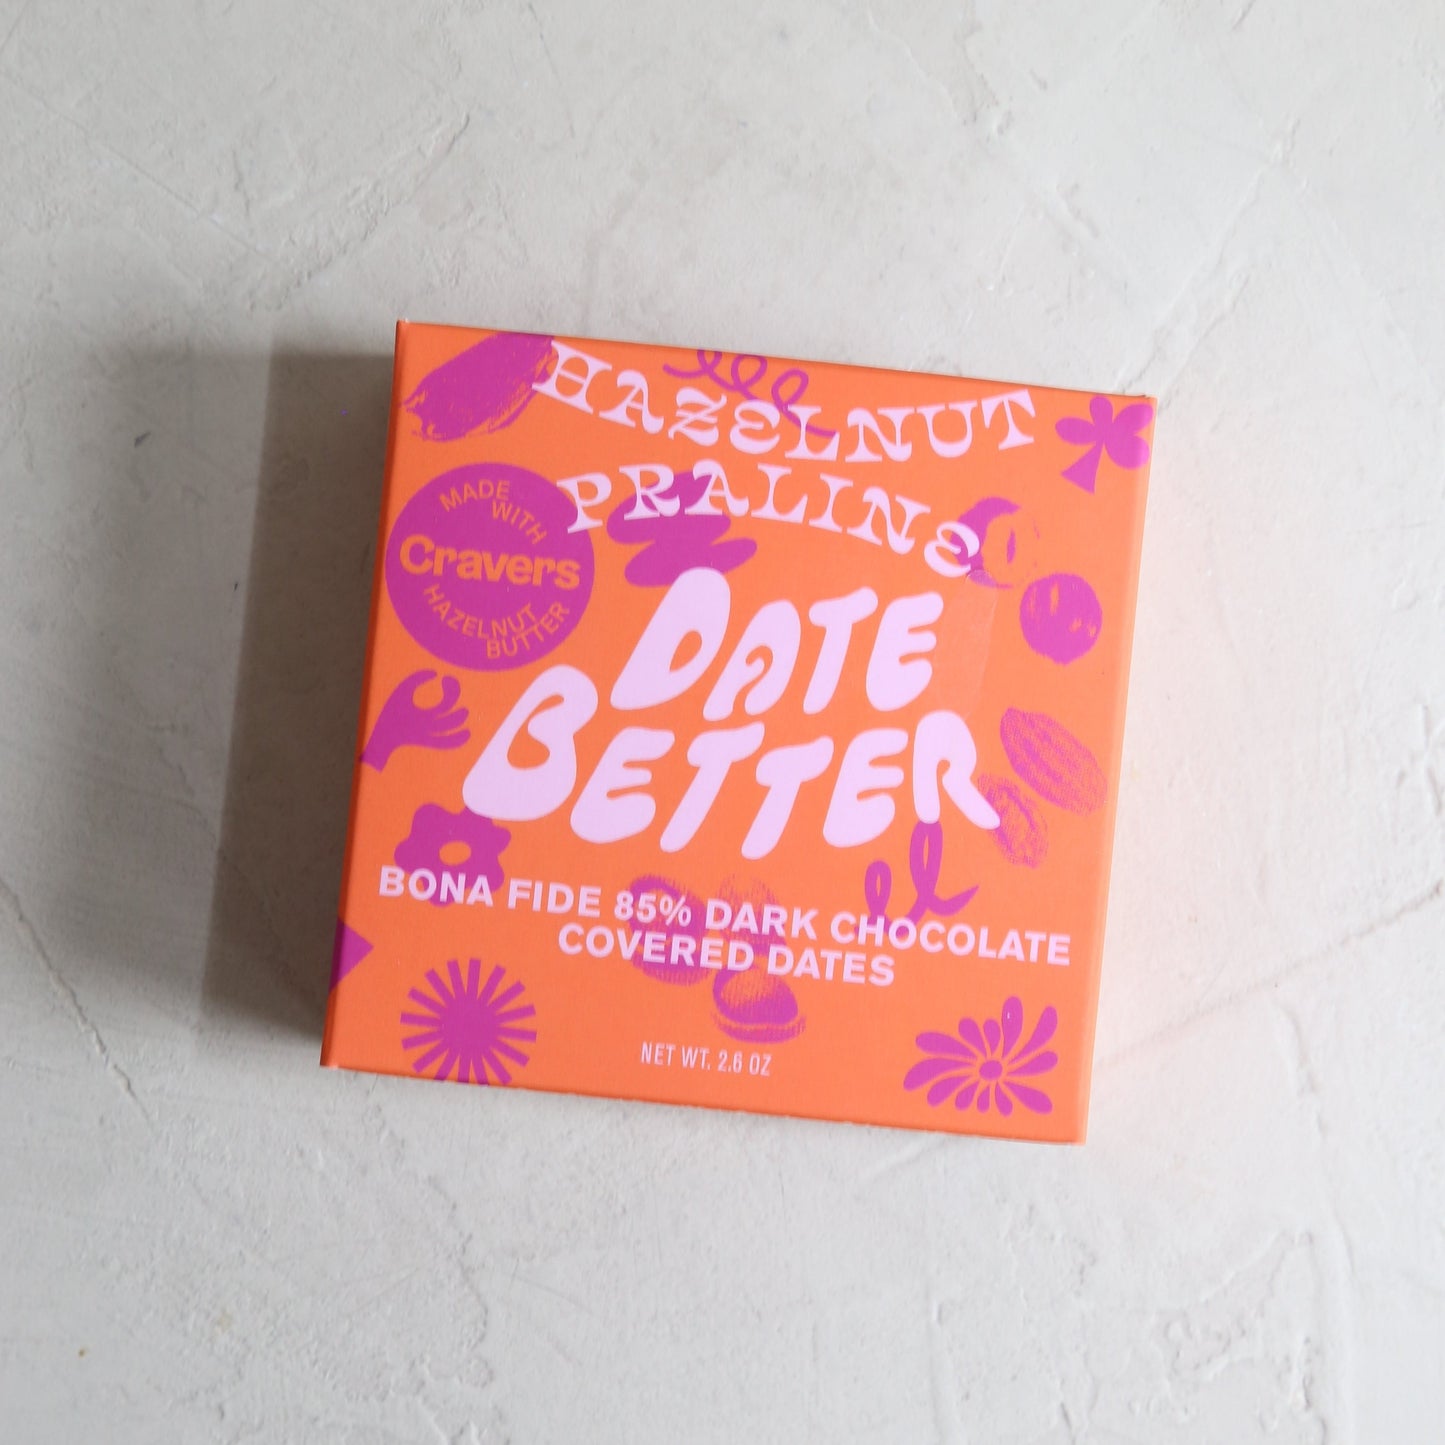 Date Better x Cravers hazlnut praline dark chocolate cover dates available at Rook & Rose.